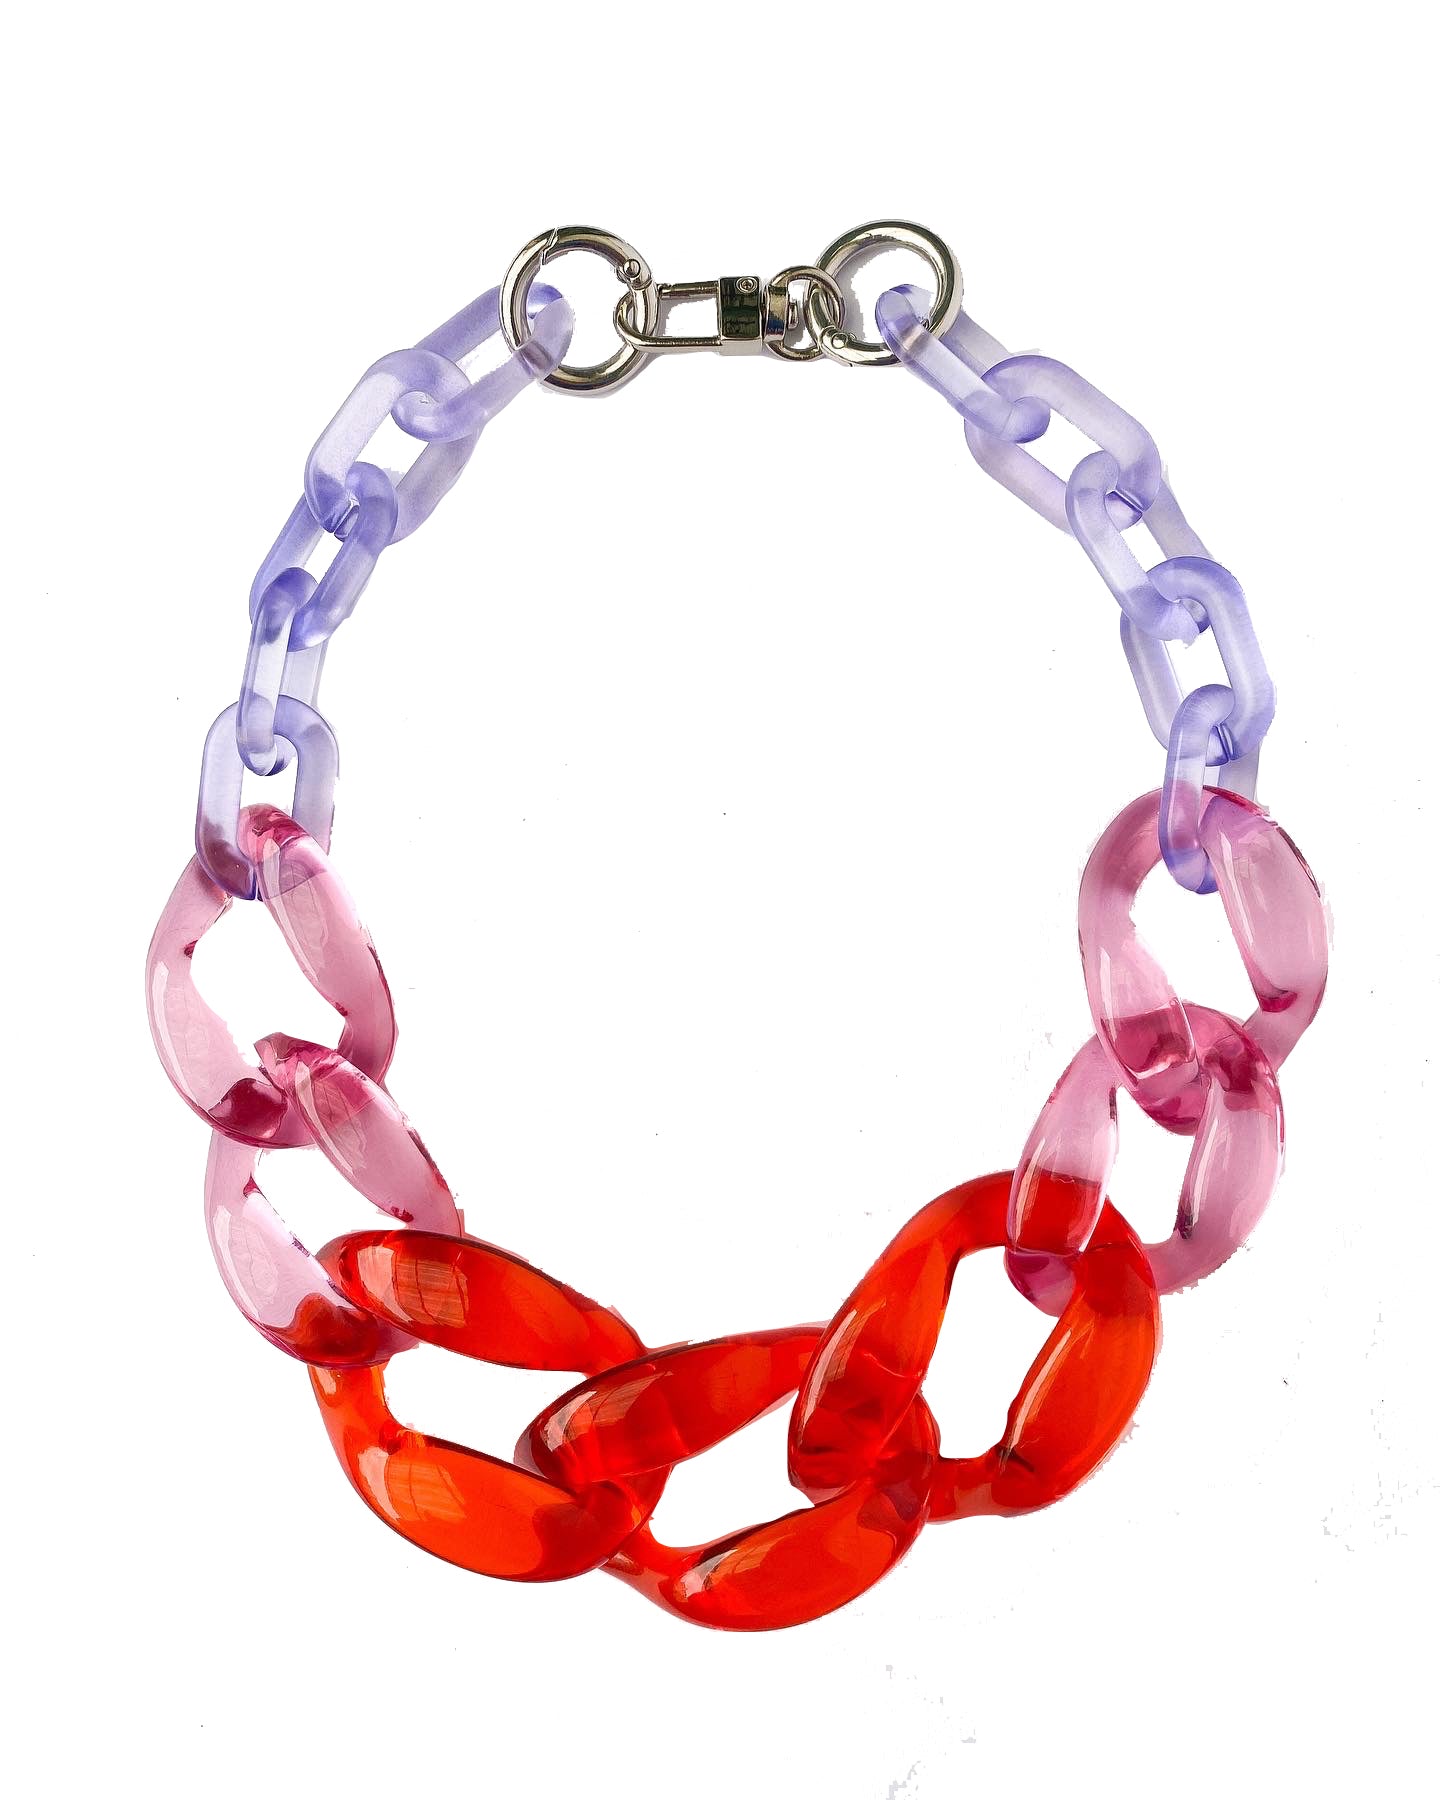 Infinite Colors Necklace - Opaque Red Pink Purple